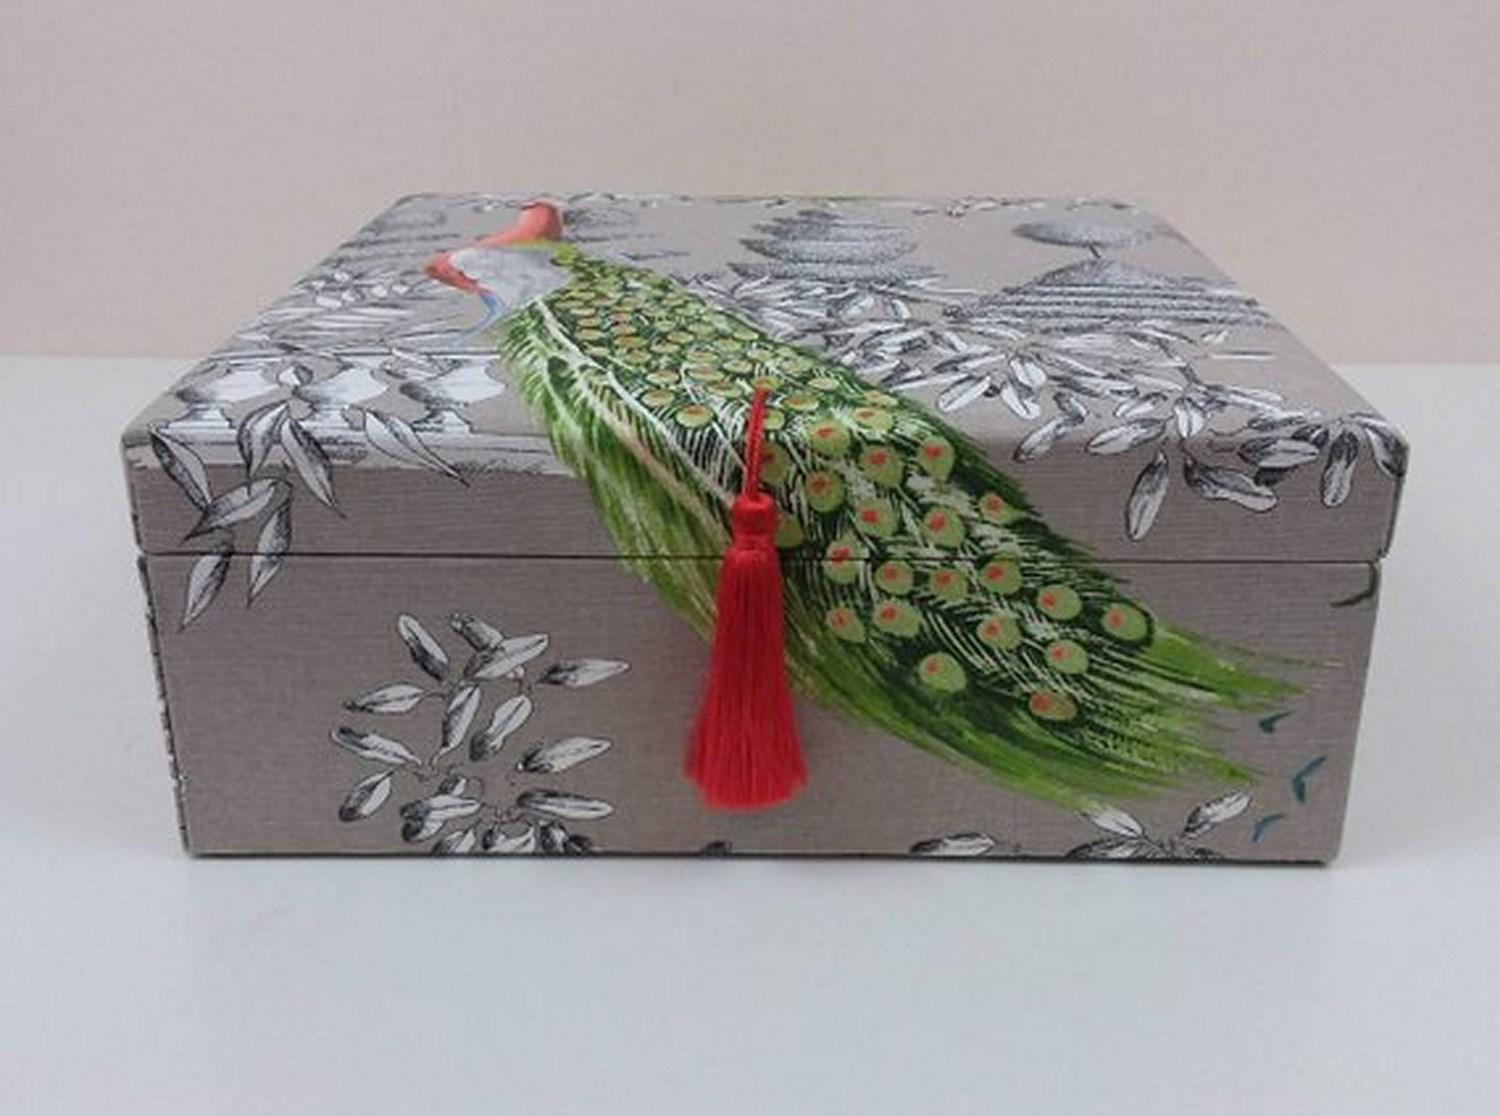 Beautiful storage box entirely handmade

Perfect for storing your Hermès scarves !

Made in France

Made of Wood Cardboard

Covered with Cotton Fabric

The lid is lightly padded and embellished with an orange pompom

Pattern: Birds

Colorways: Grey,